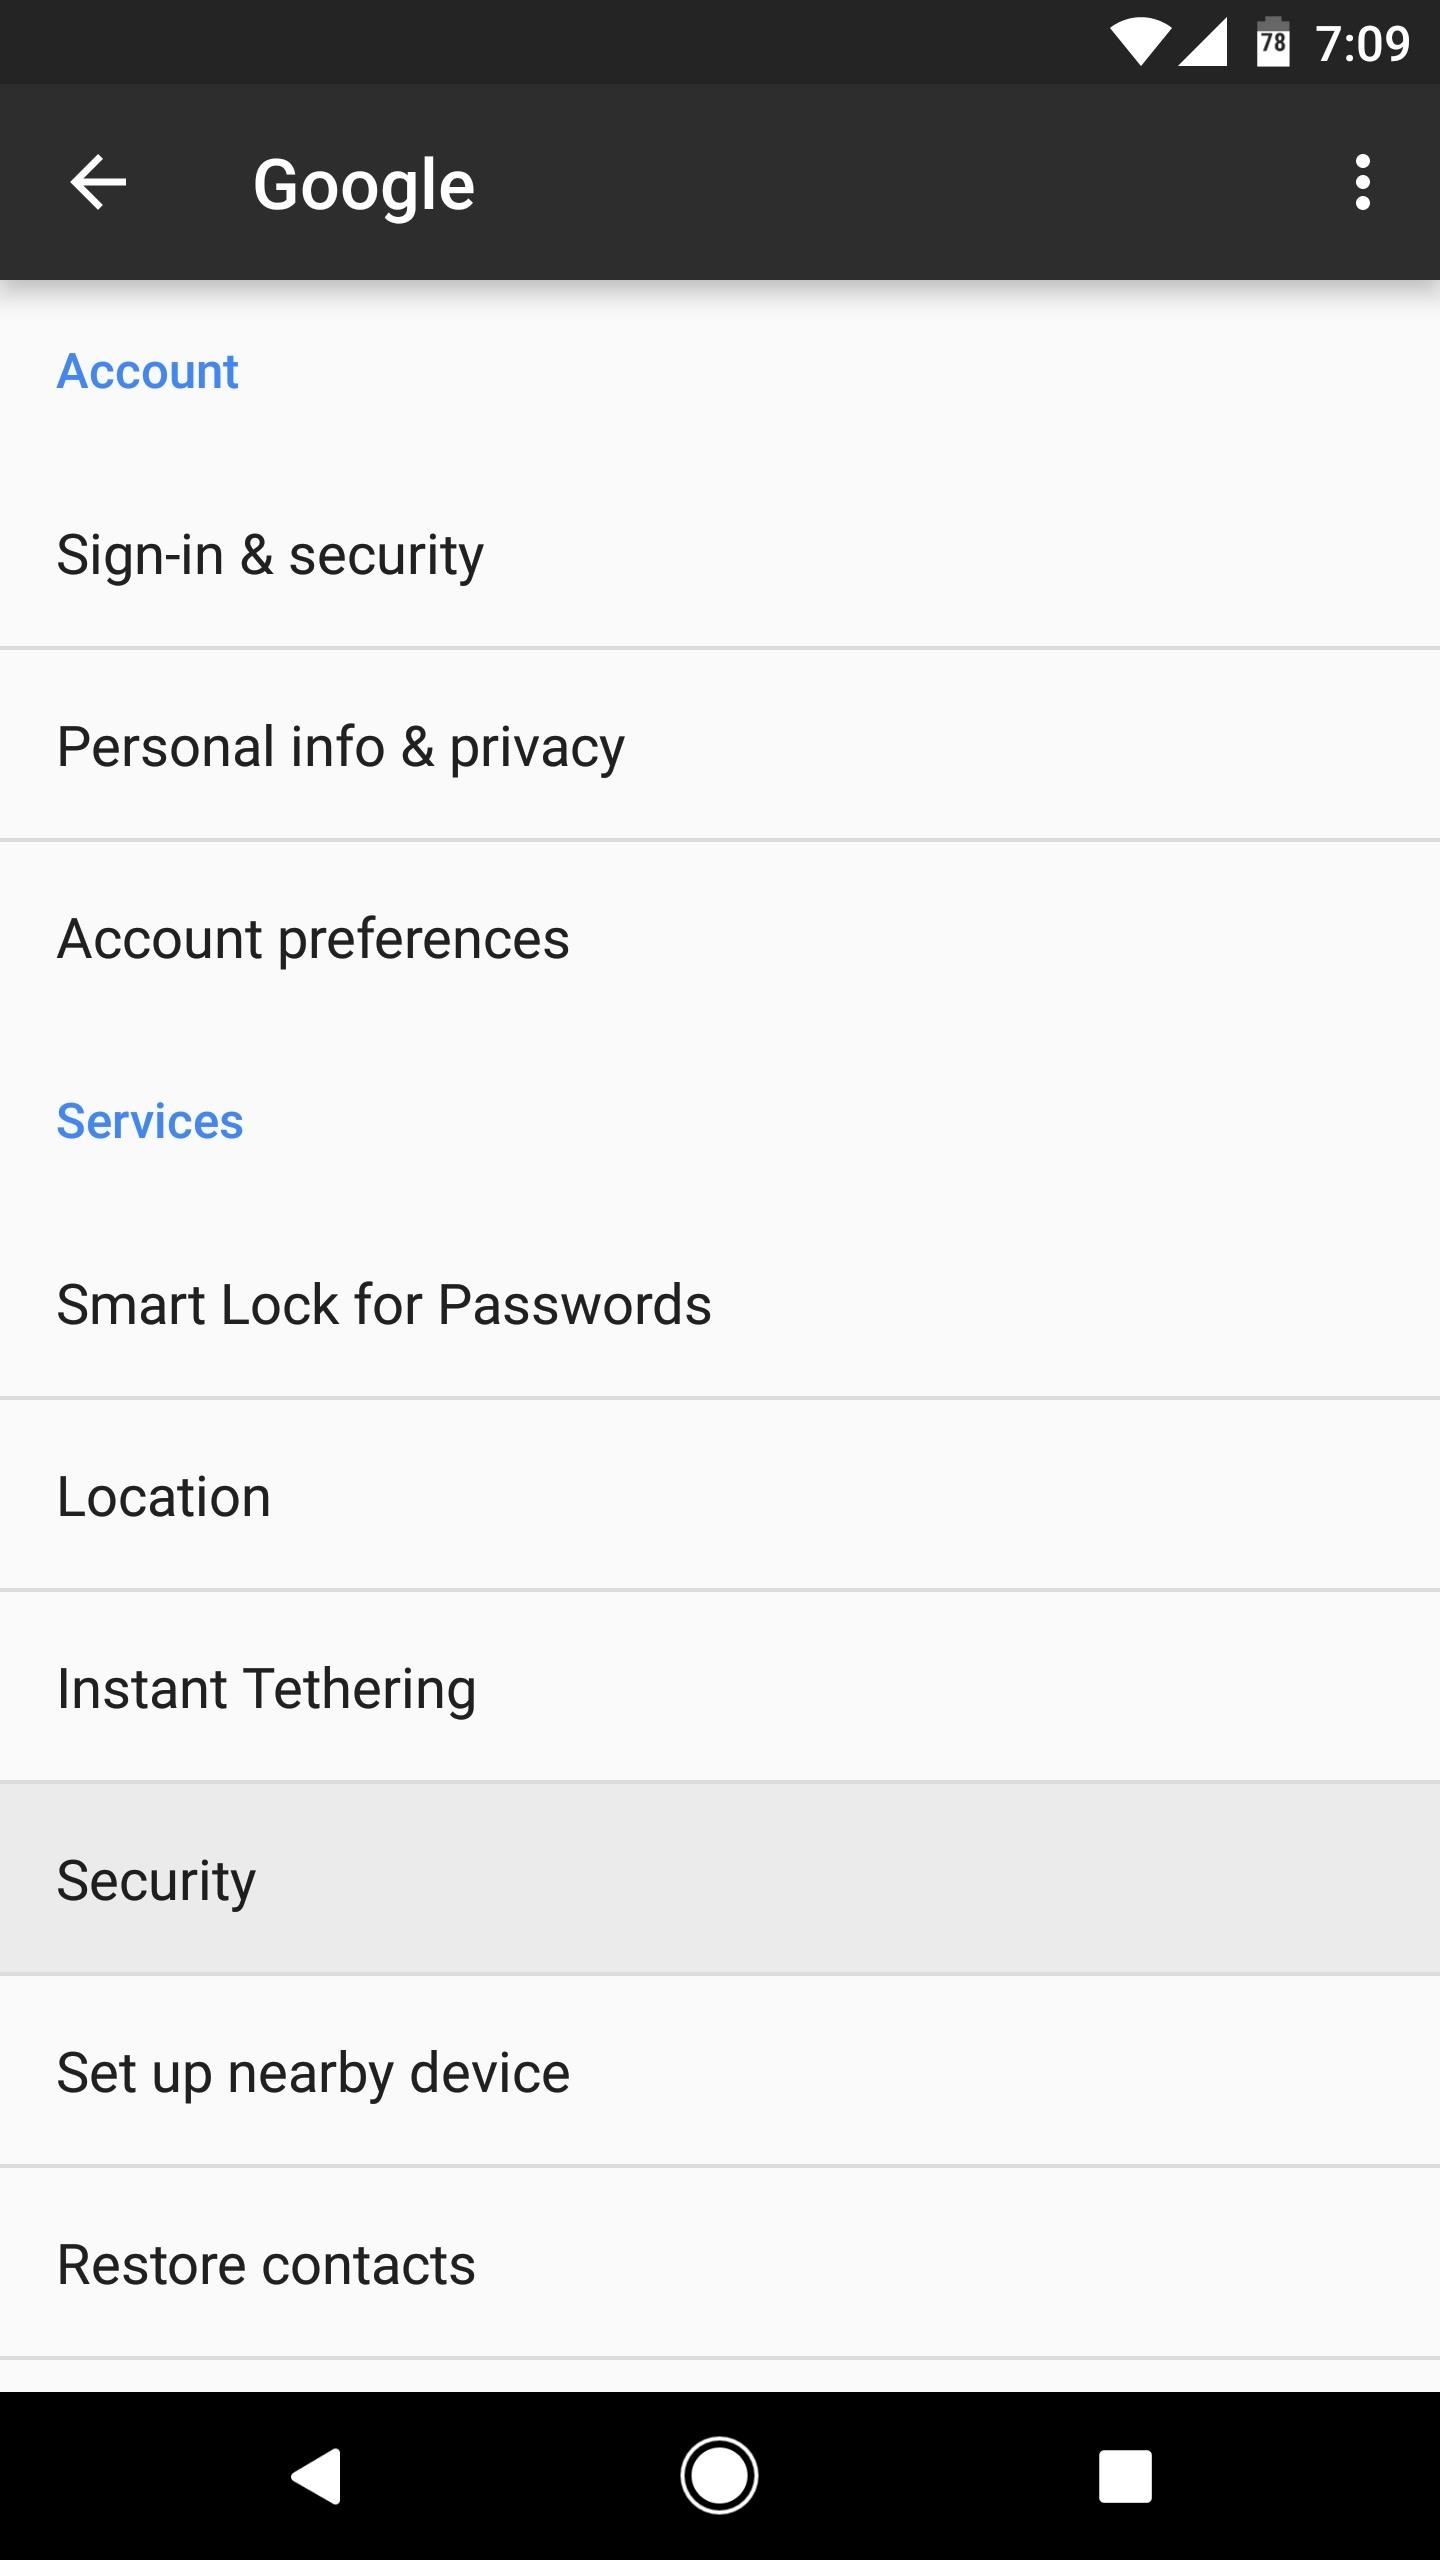 How to Fix Titanium Backup & Substratum Problems Caused by the Latest Google Play Services Update